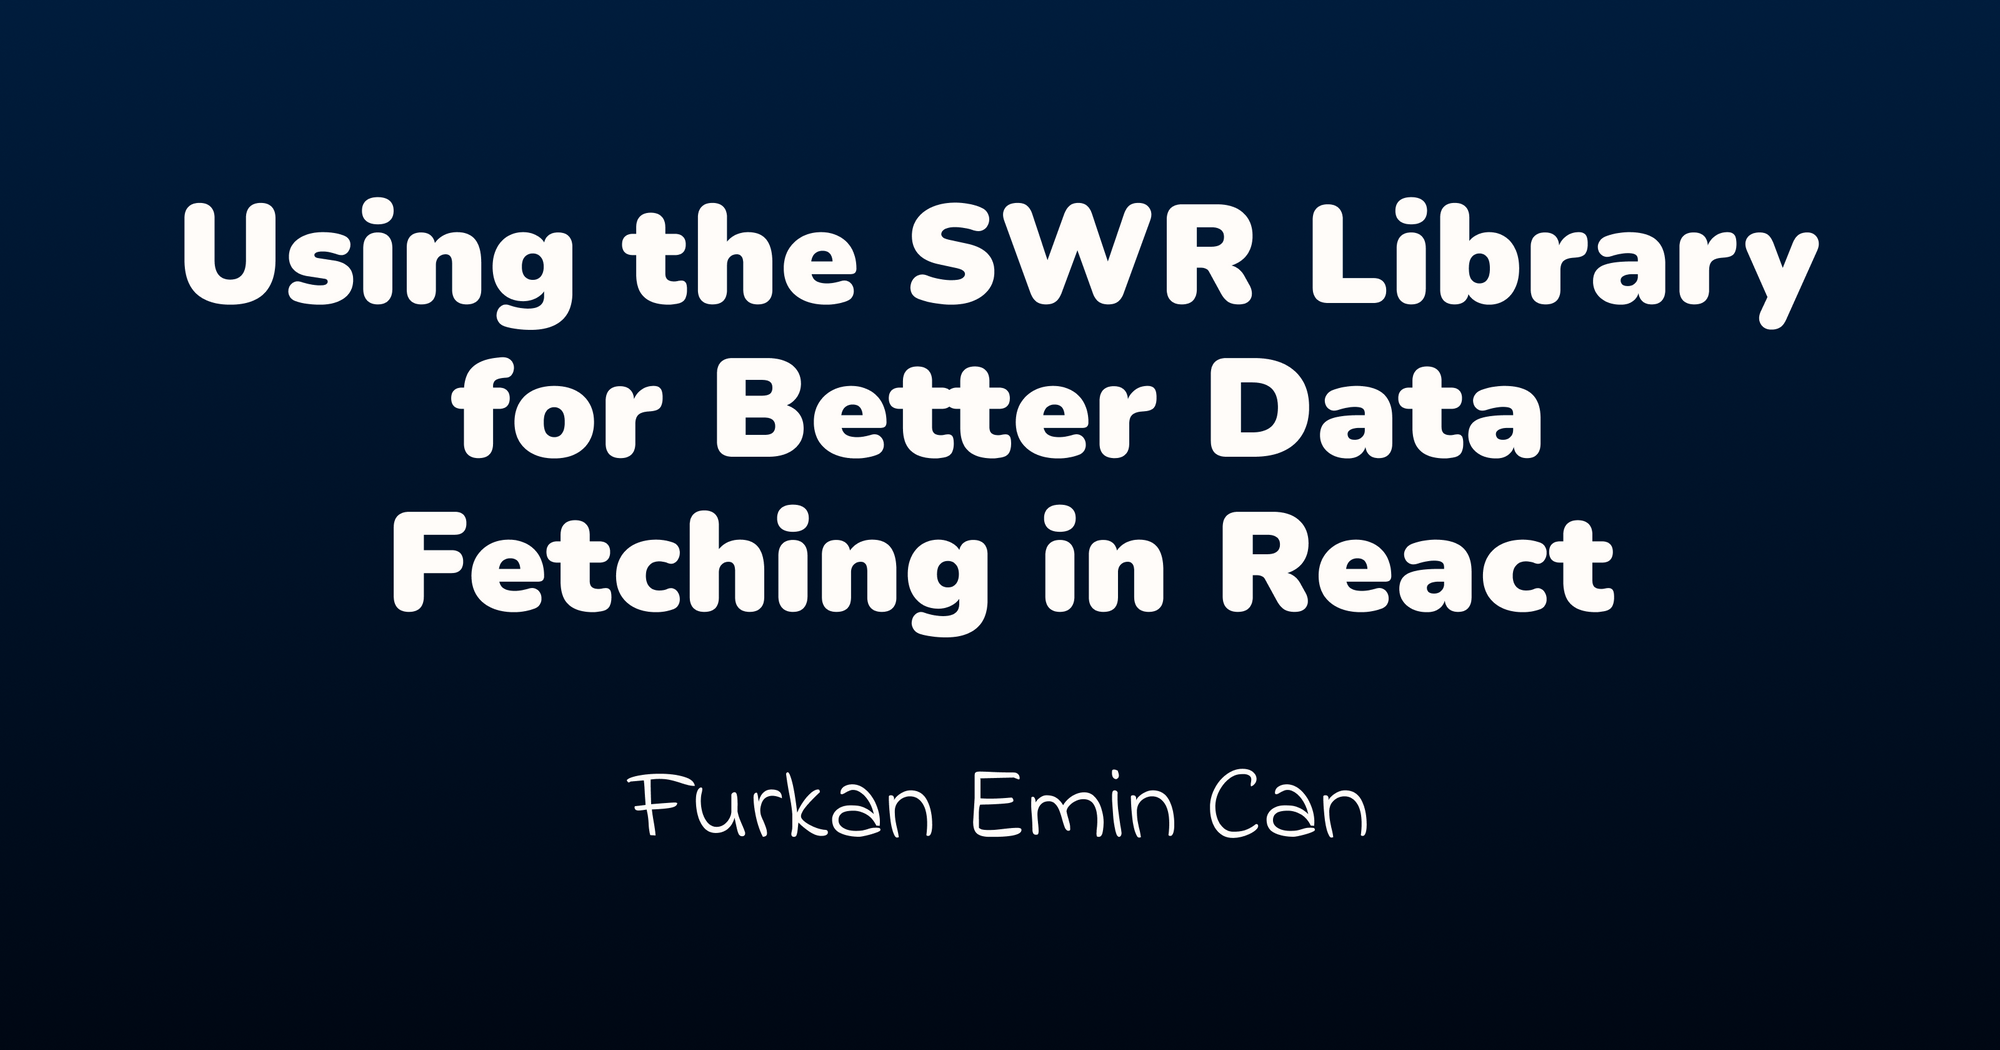 How to Use the SWR Library for Better Data Fetching in React